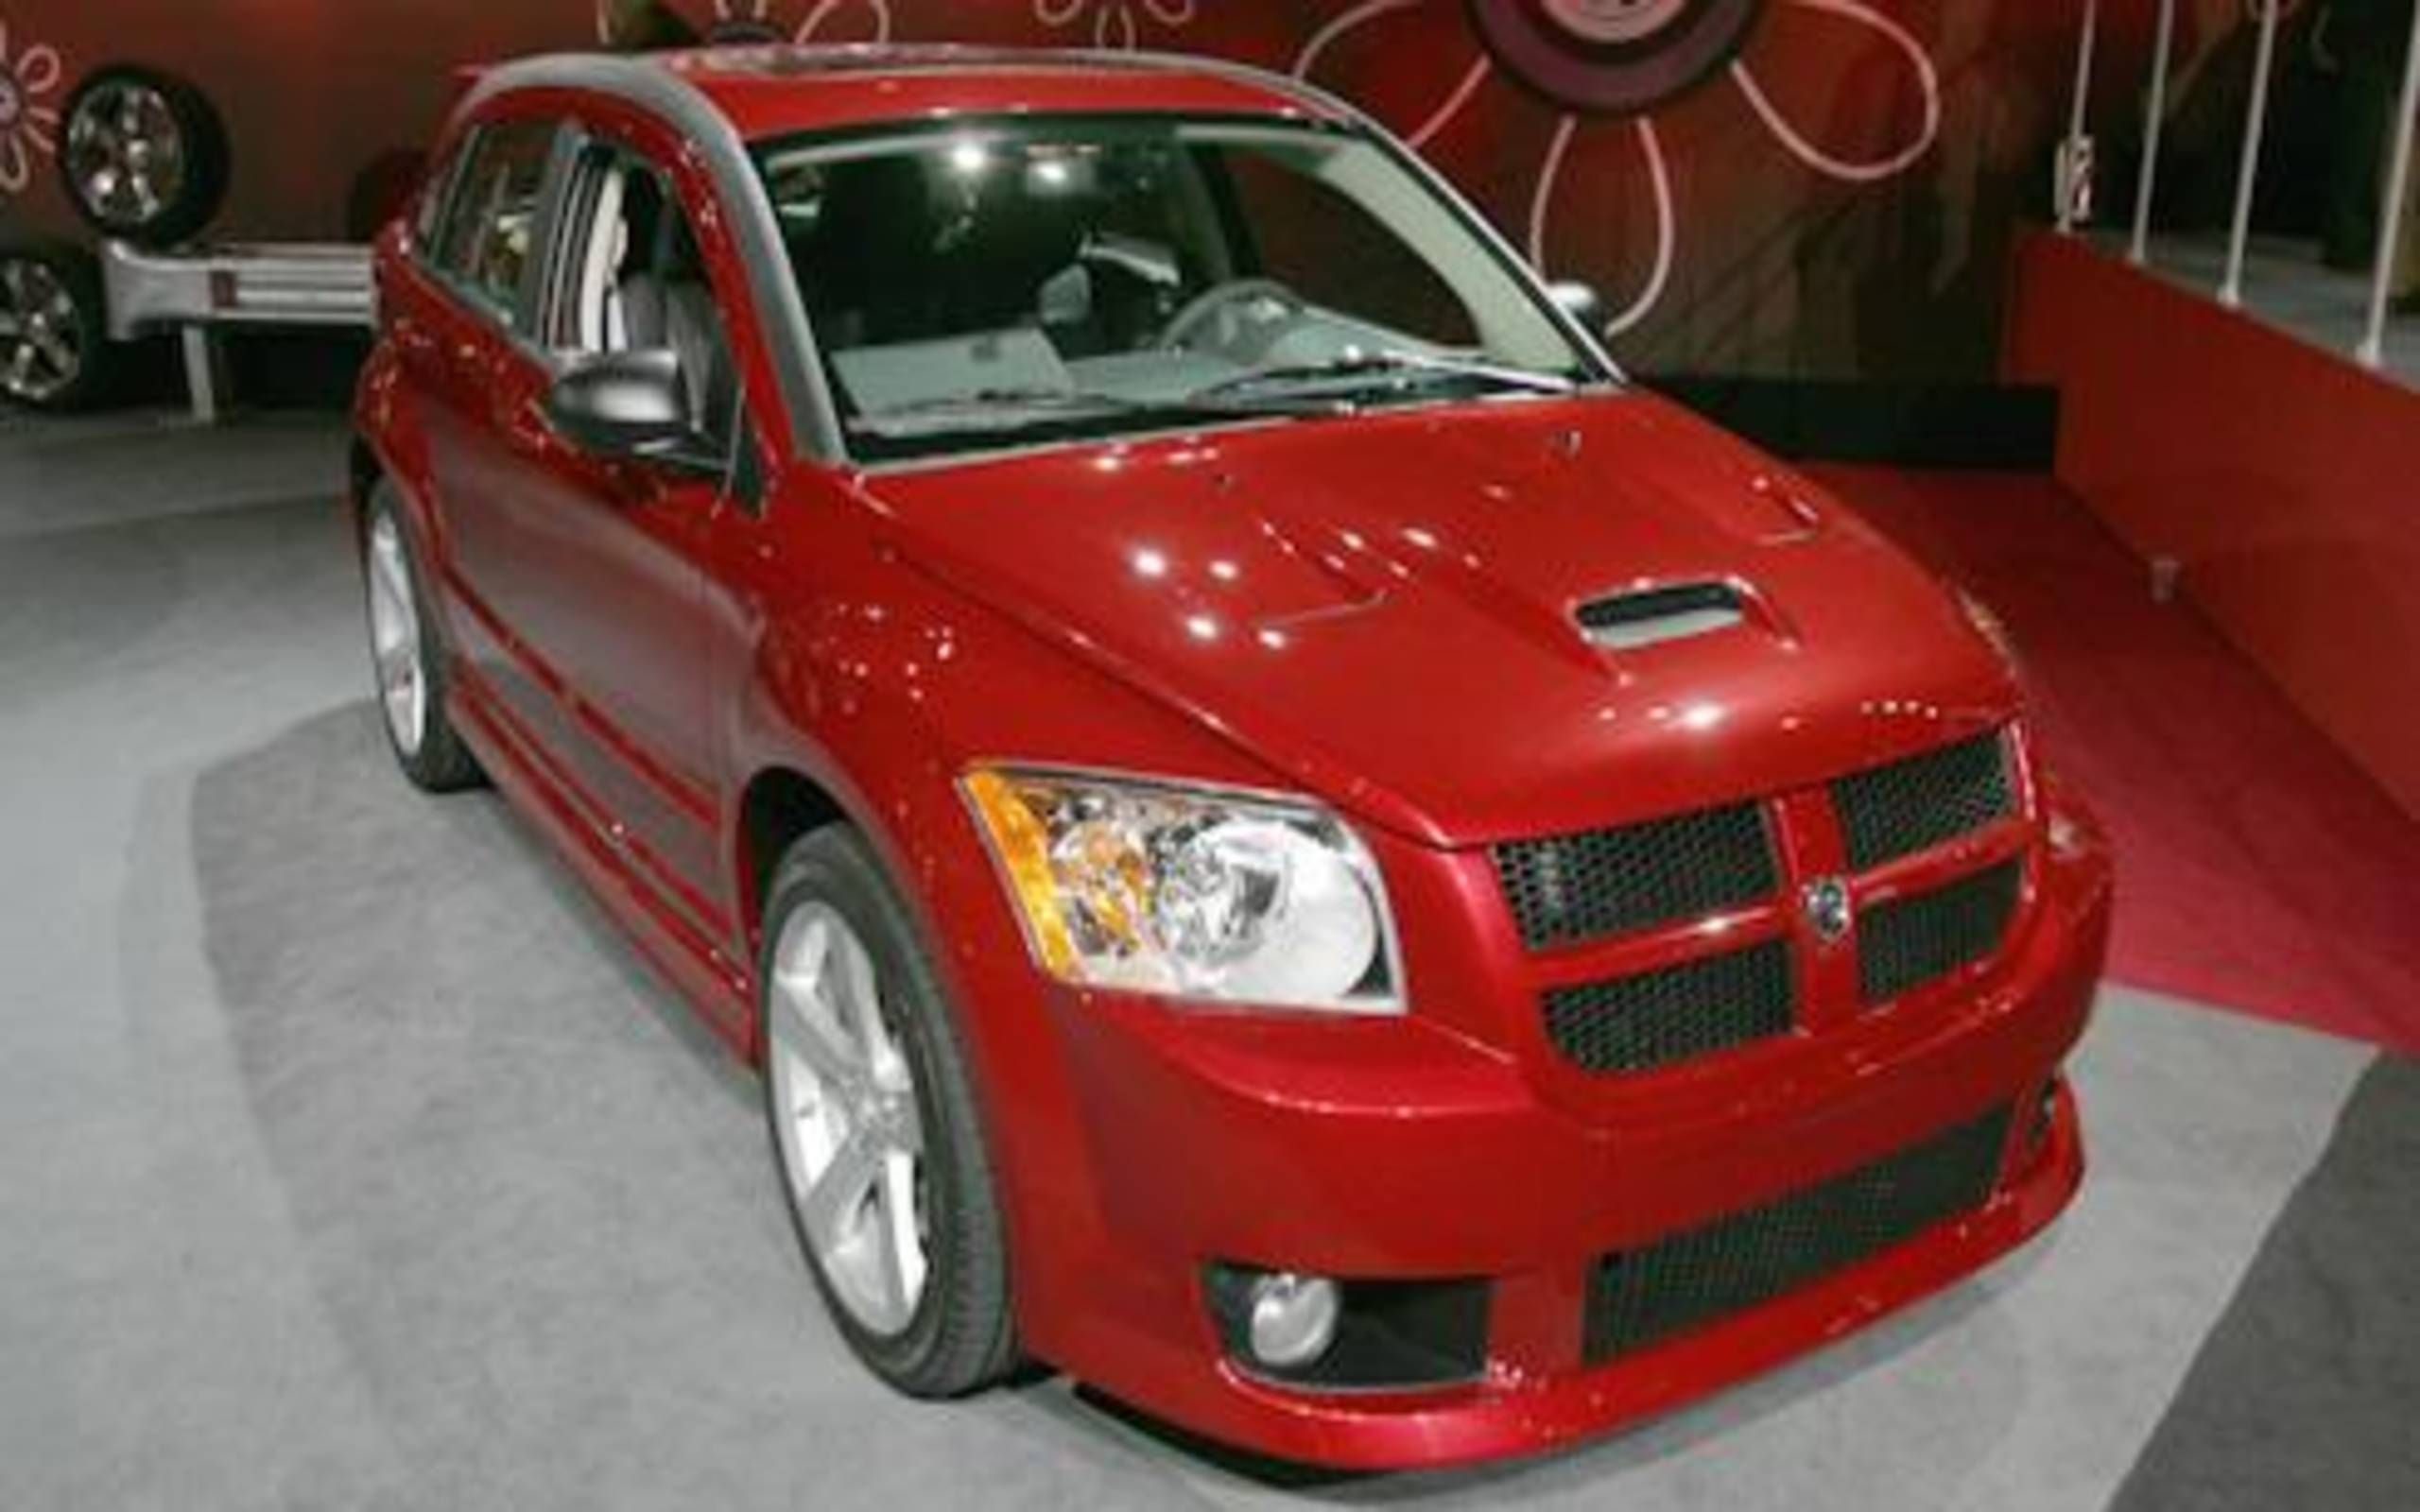 Higher Caliber: SRT team punches up new small car with turbo model